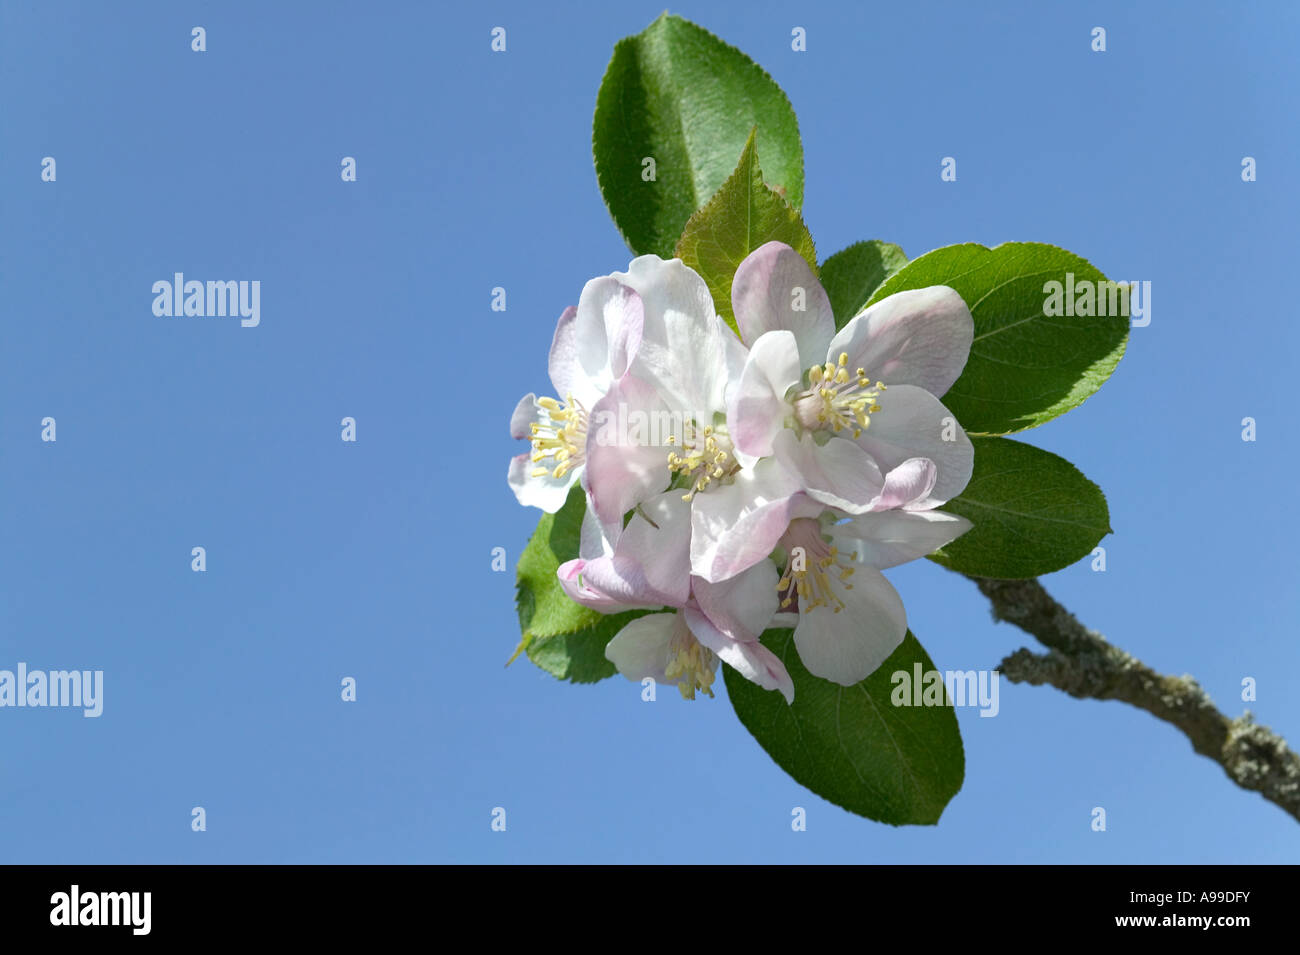 Apple blossom isolated against a bright blue sky Stock Photo